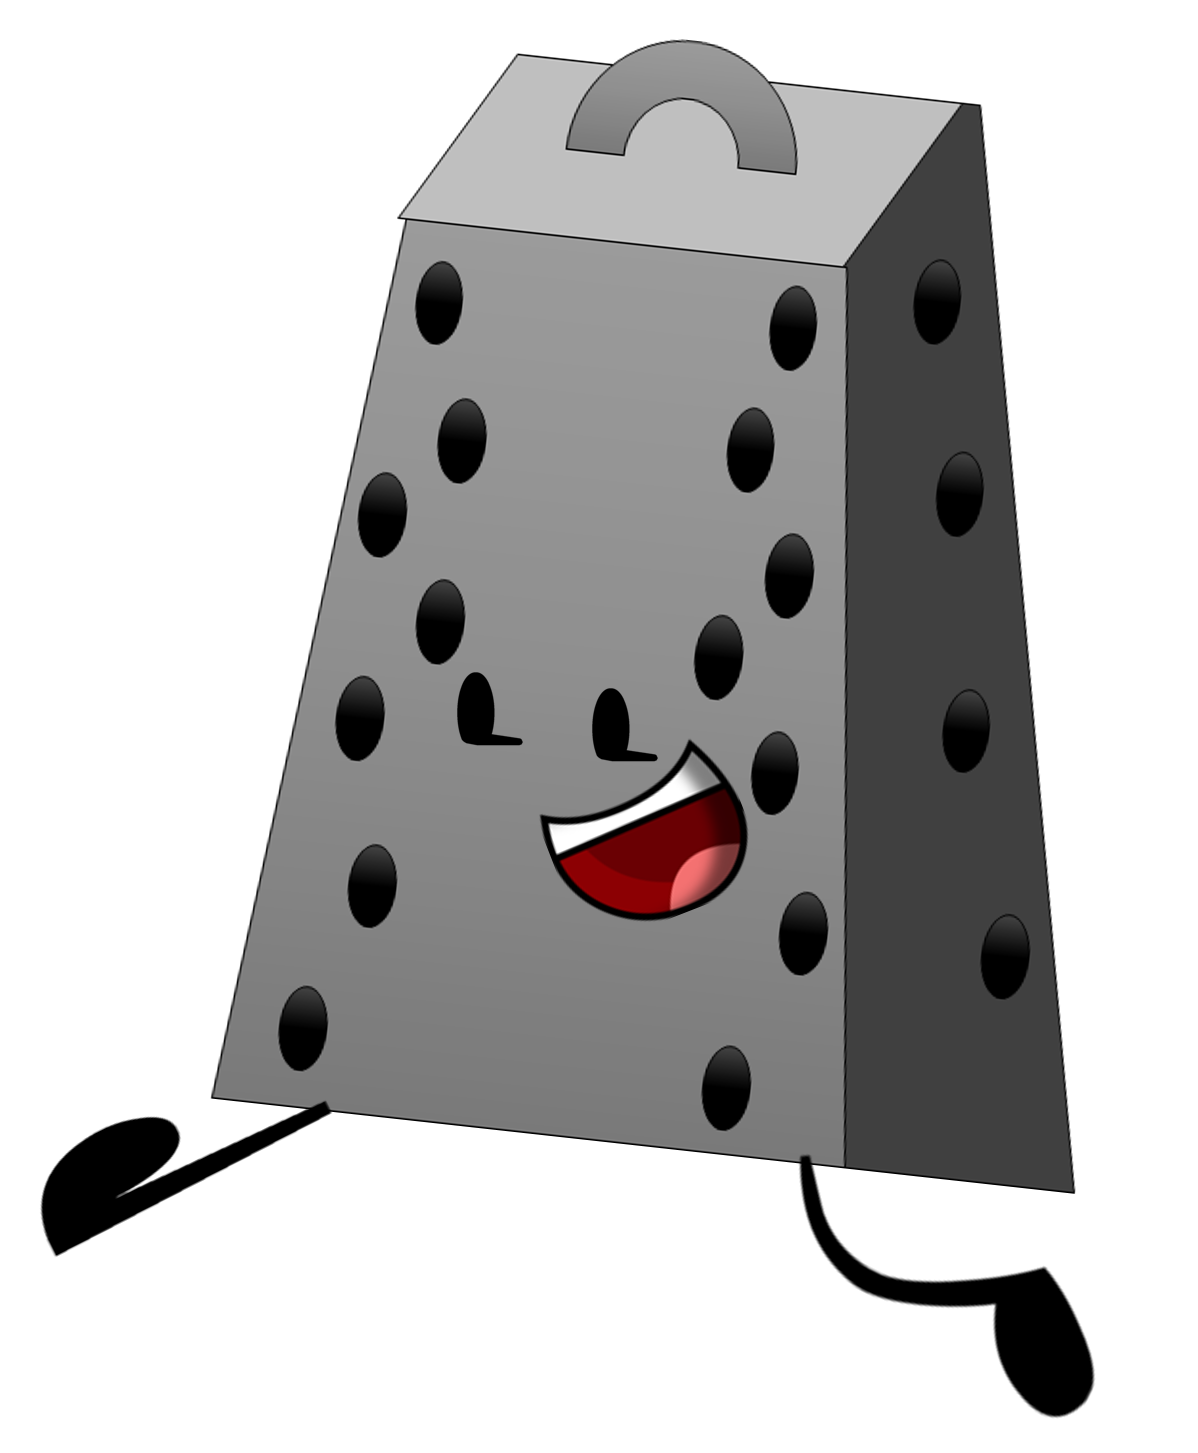 Cheese grater magic cruiser. Clipart park object